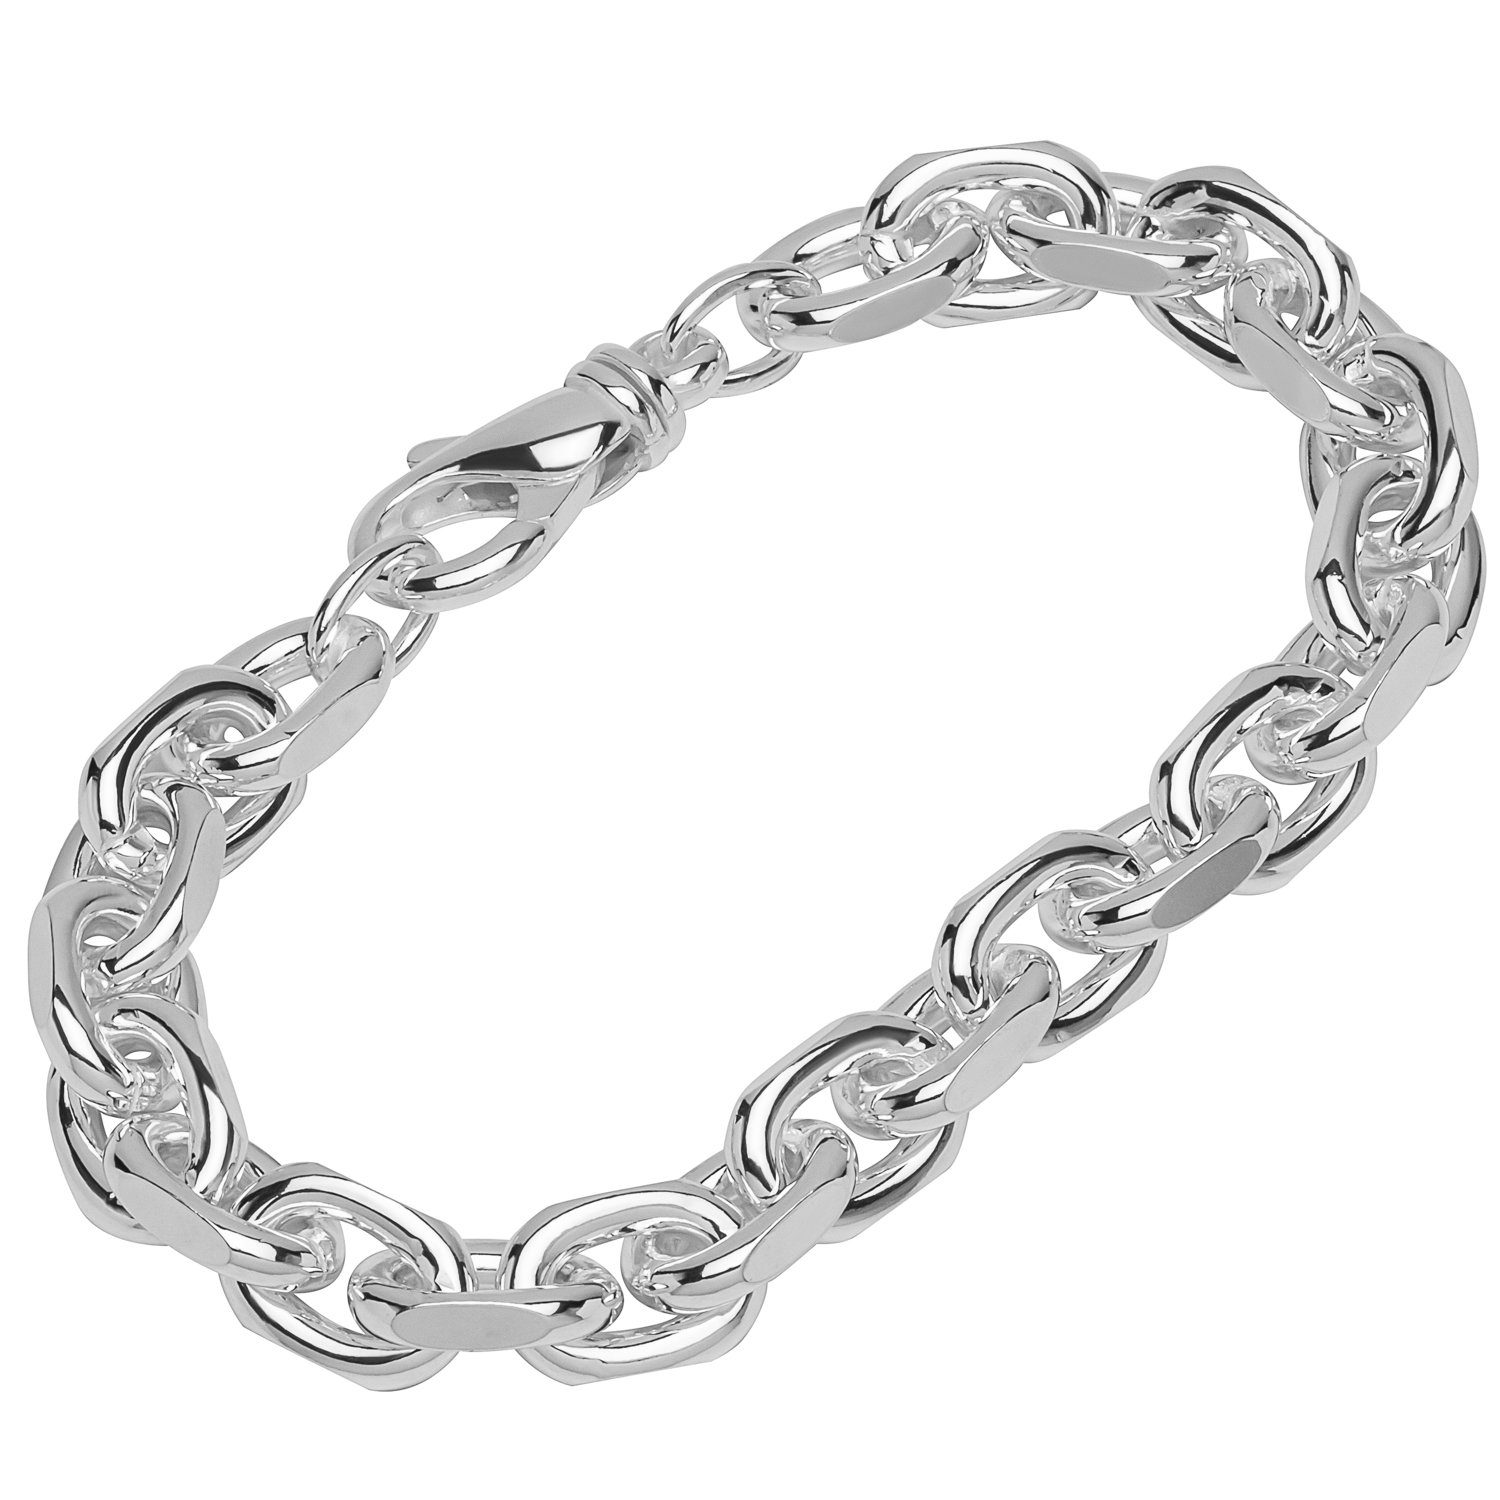 NKlaus Silberarmband Armband 925 Sterling Silber 22cm Ankerkette seitli (1 Stück), Made in Germany